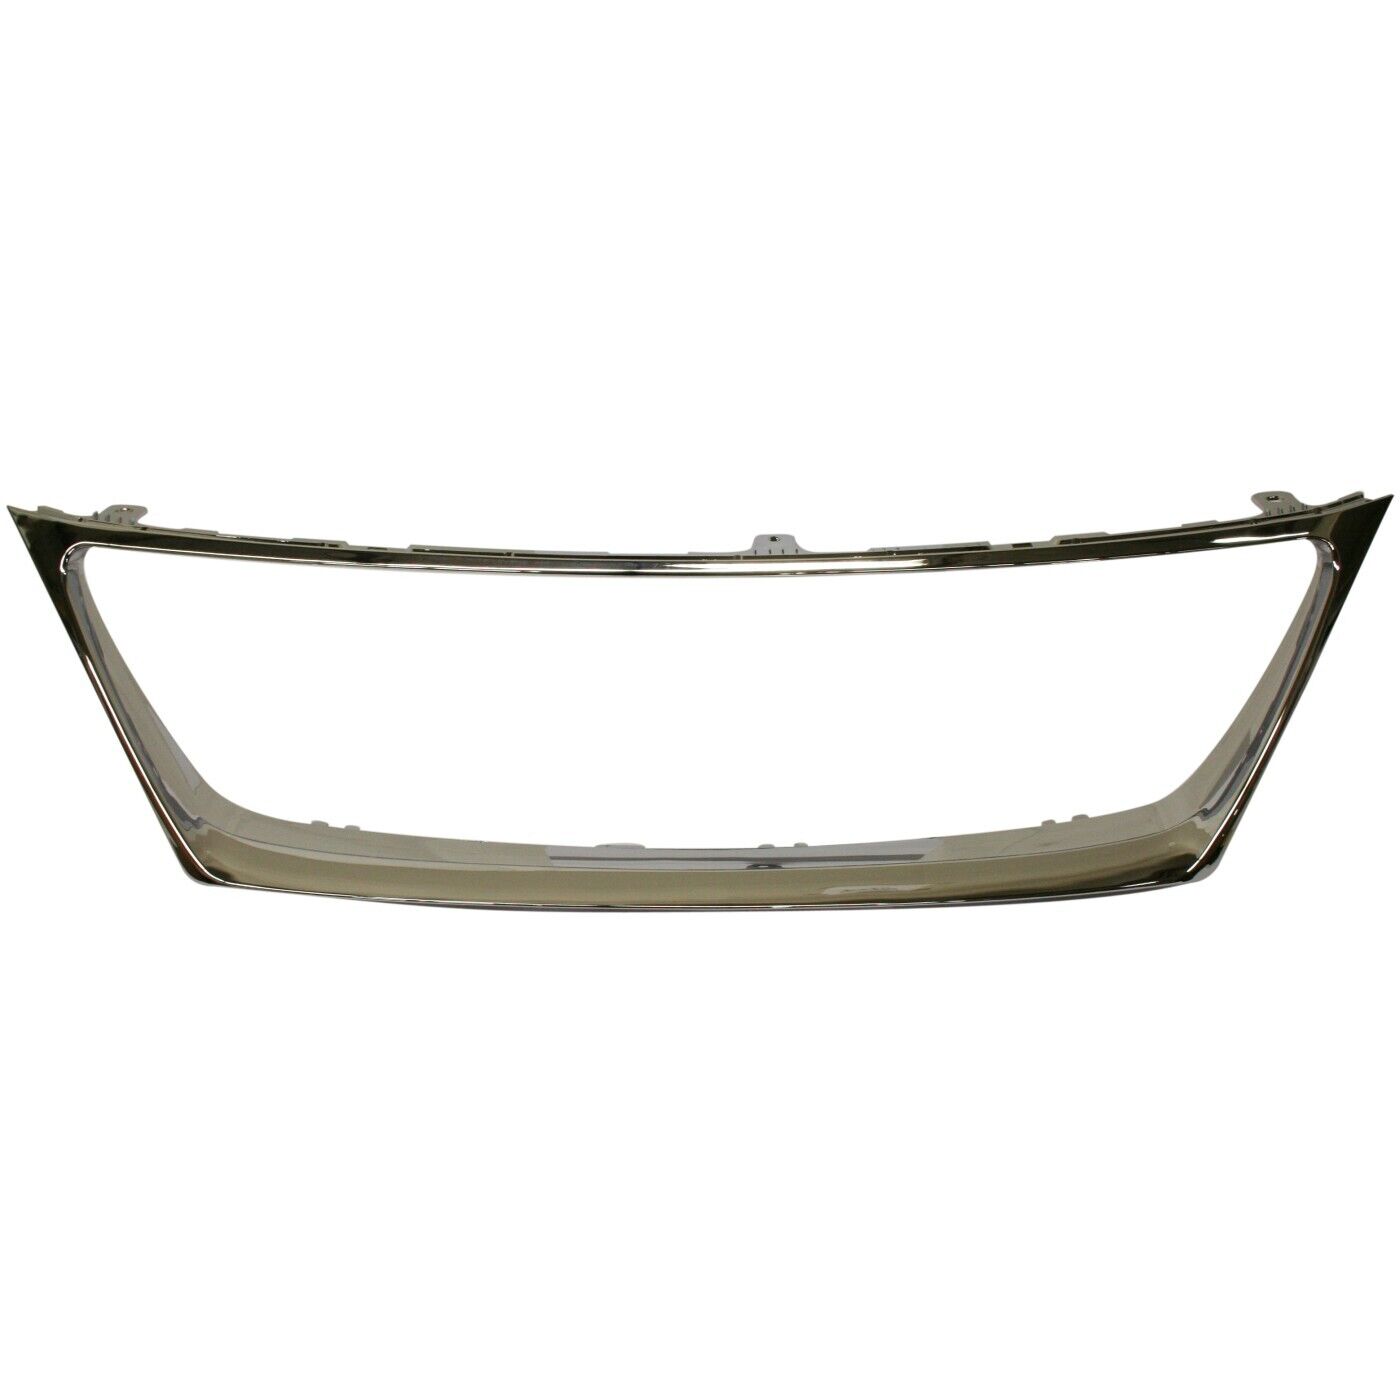 Grille Shell For 2006-2008 Lexus IS250 IS350 Chrome Plastic